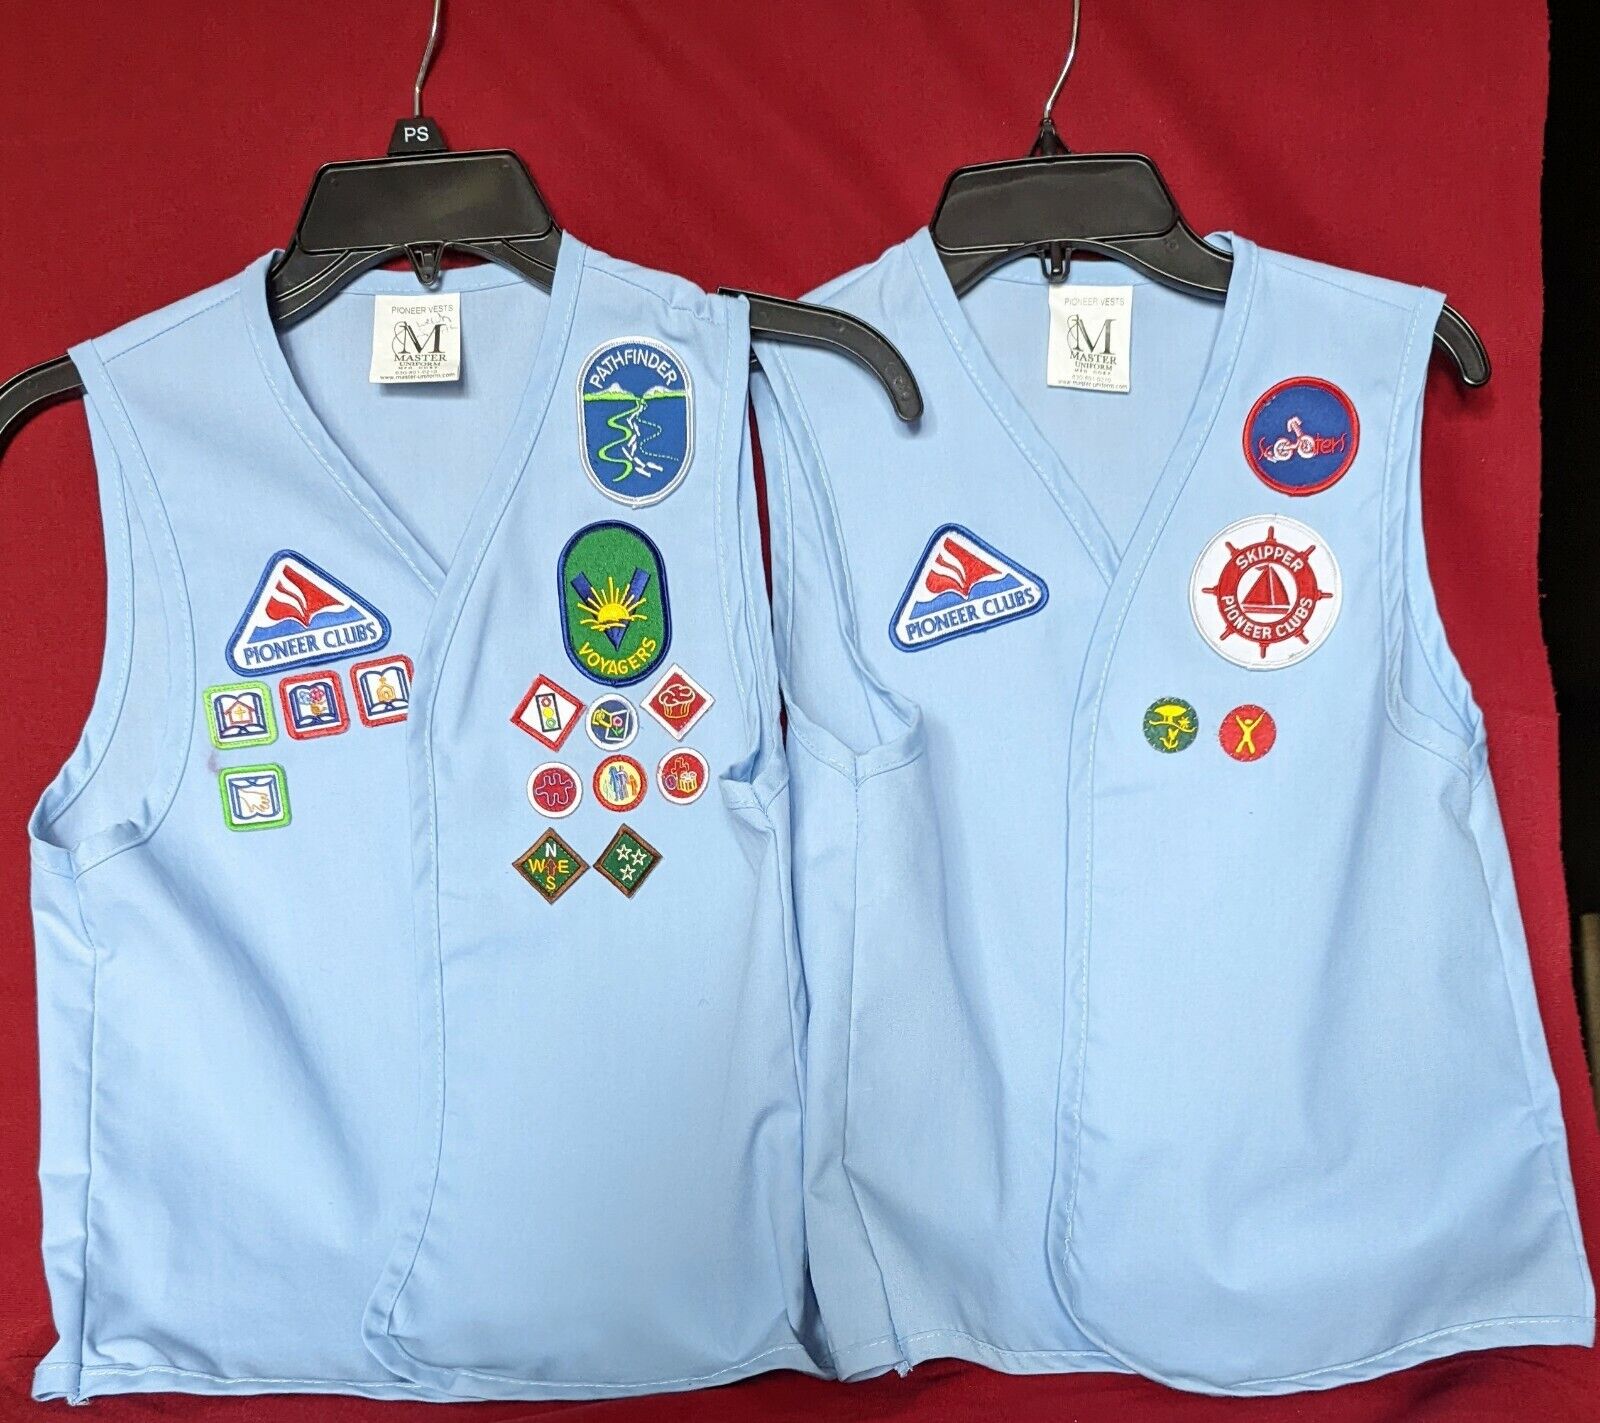 Vintage Lot of 2 Pioneer Clubs Vests sz Medium w/Patches from a SC Troop?